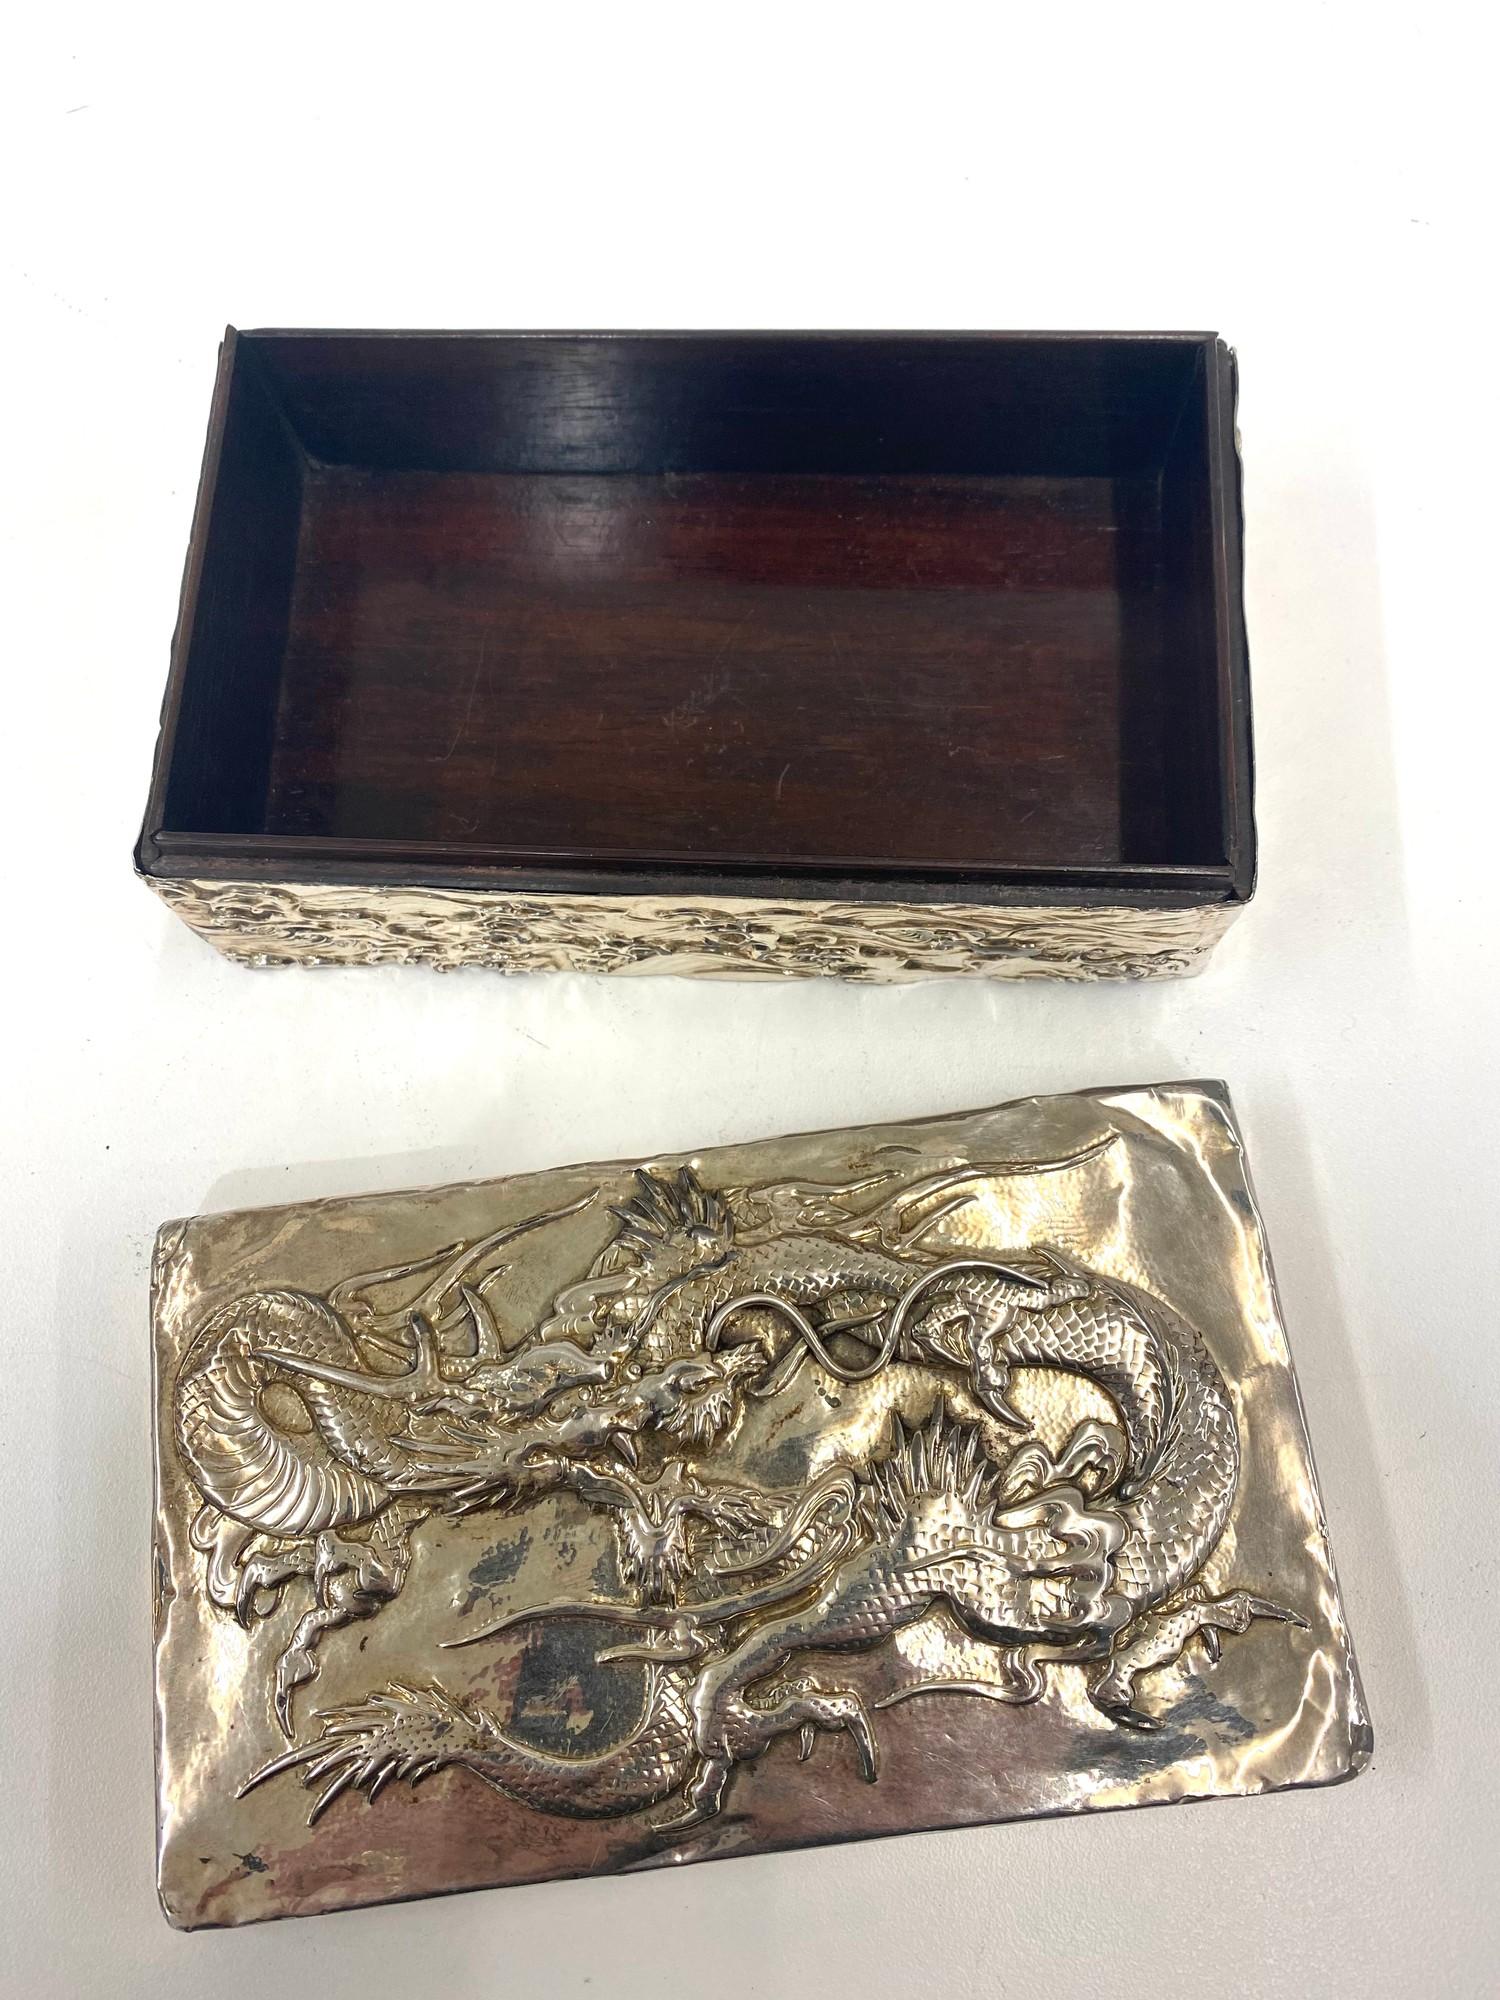 Silver and wooden cigarette box, Chinese detail, no markings but tested as silver, age related wear, - Image 3 of 5